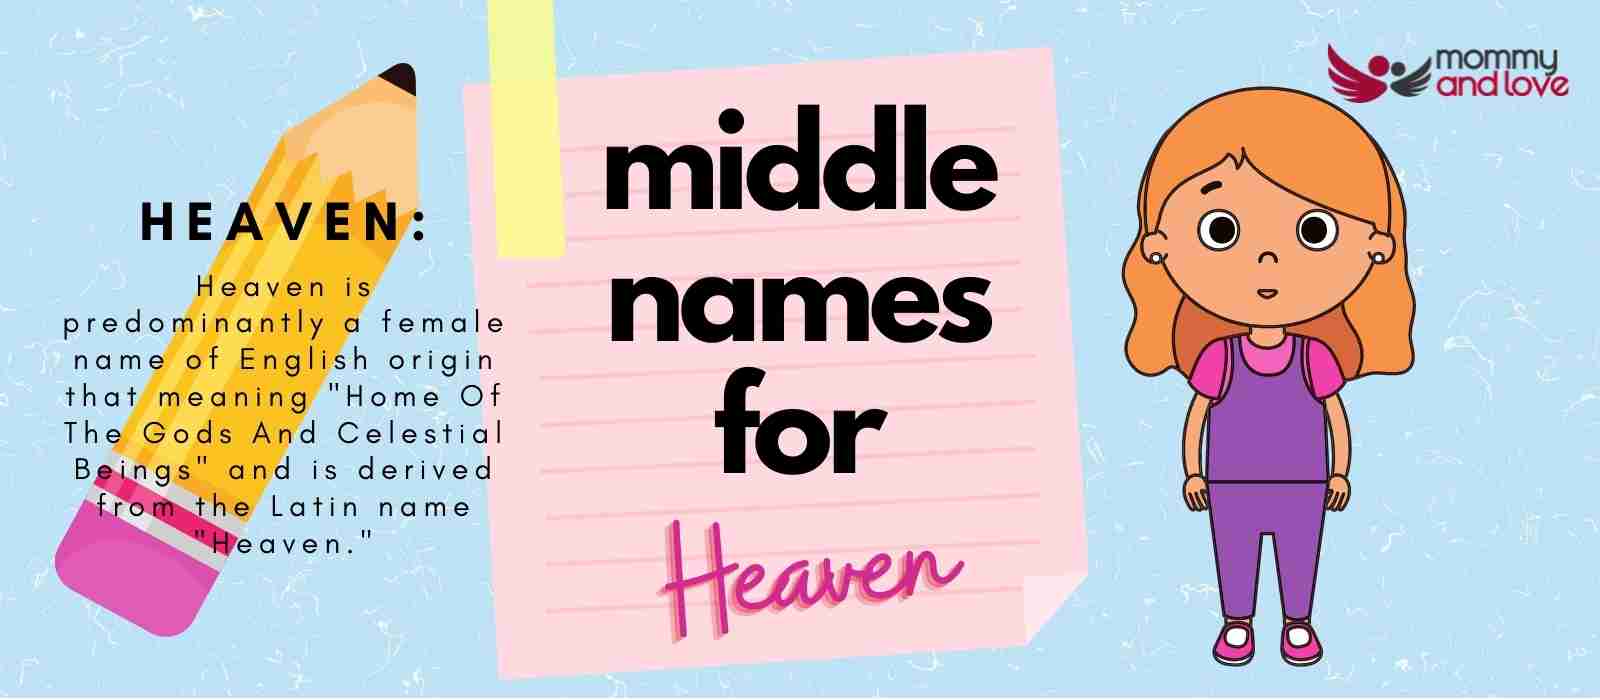 Middle Names for Heaven